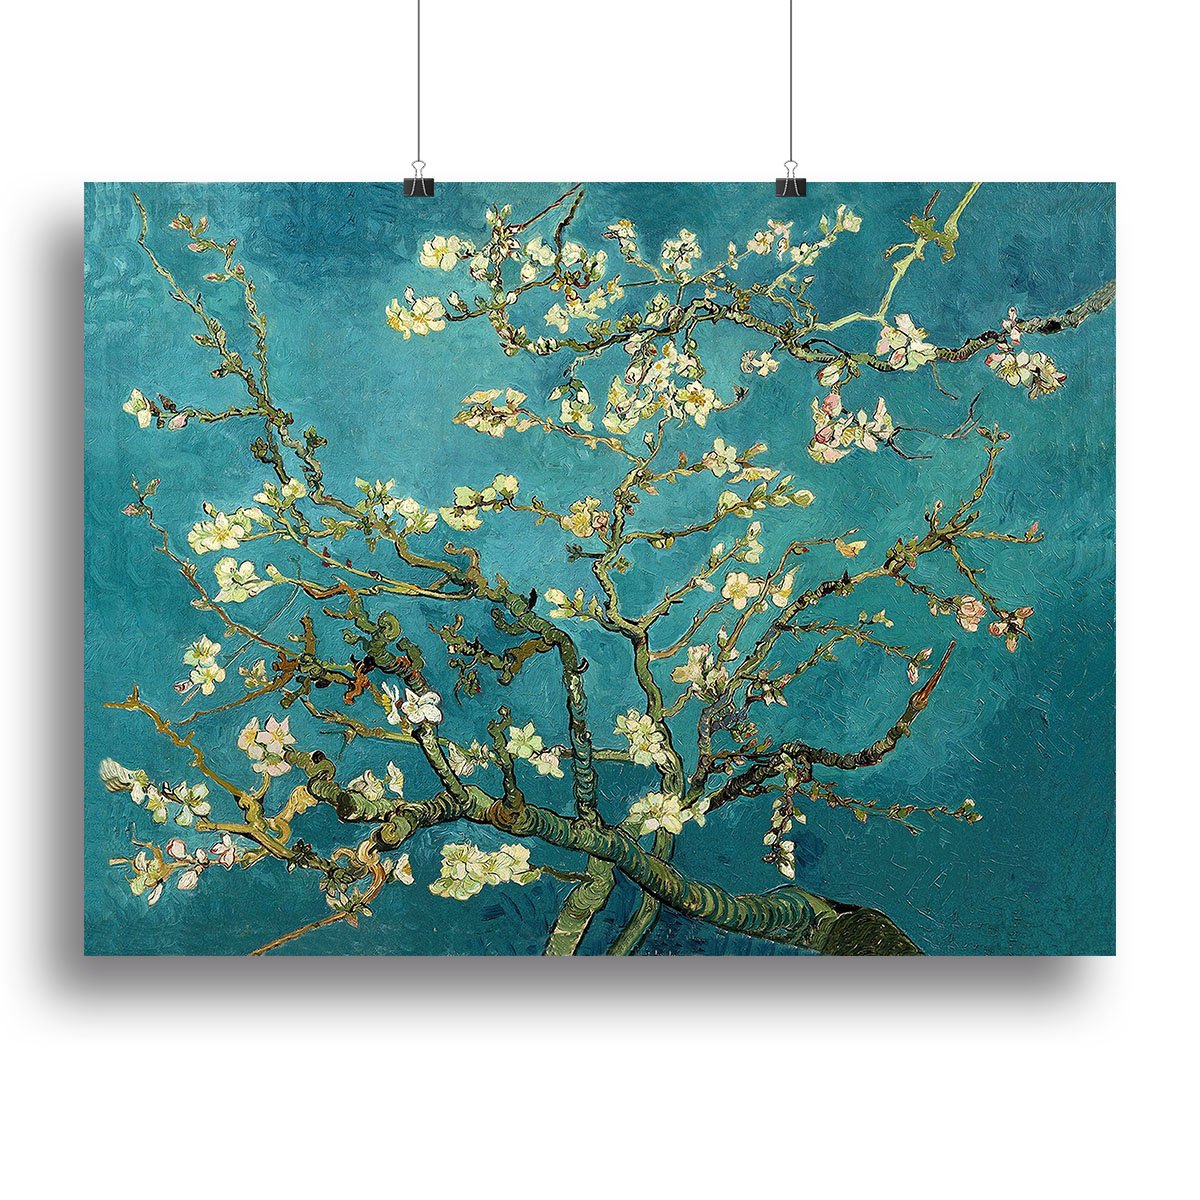 Blossoming Almond Tree by Van Gogh Canvas Print or Poster